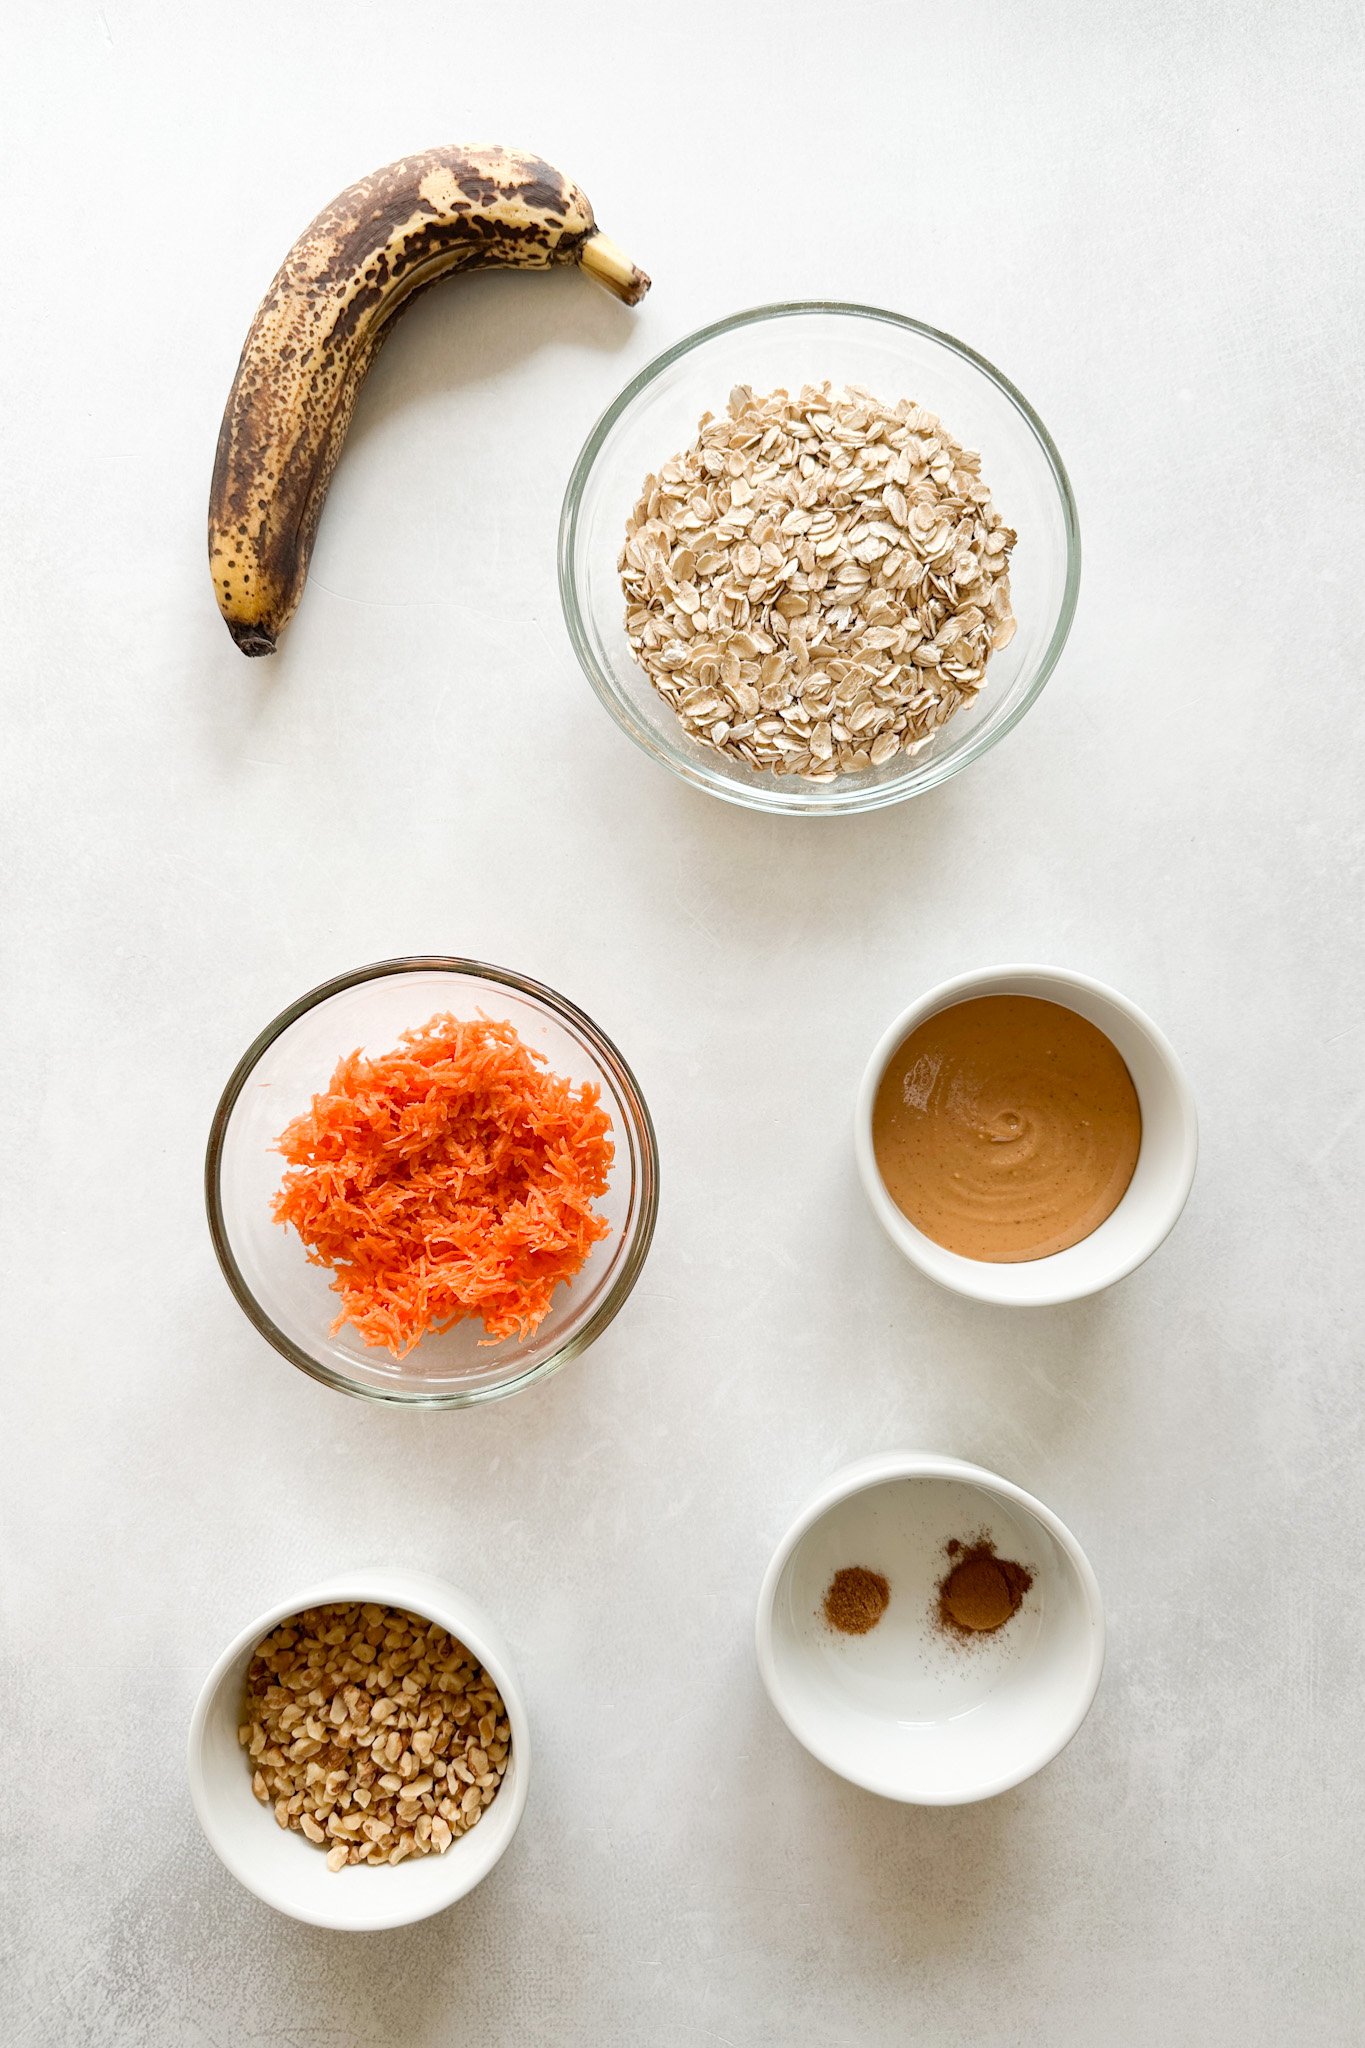 Ingredients to make carrot oatmeal cookies.